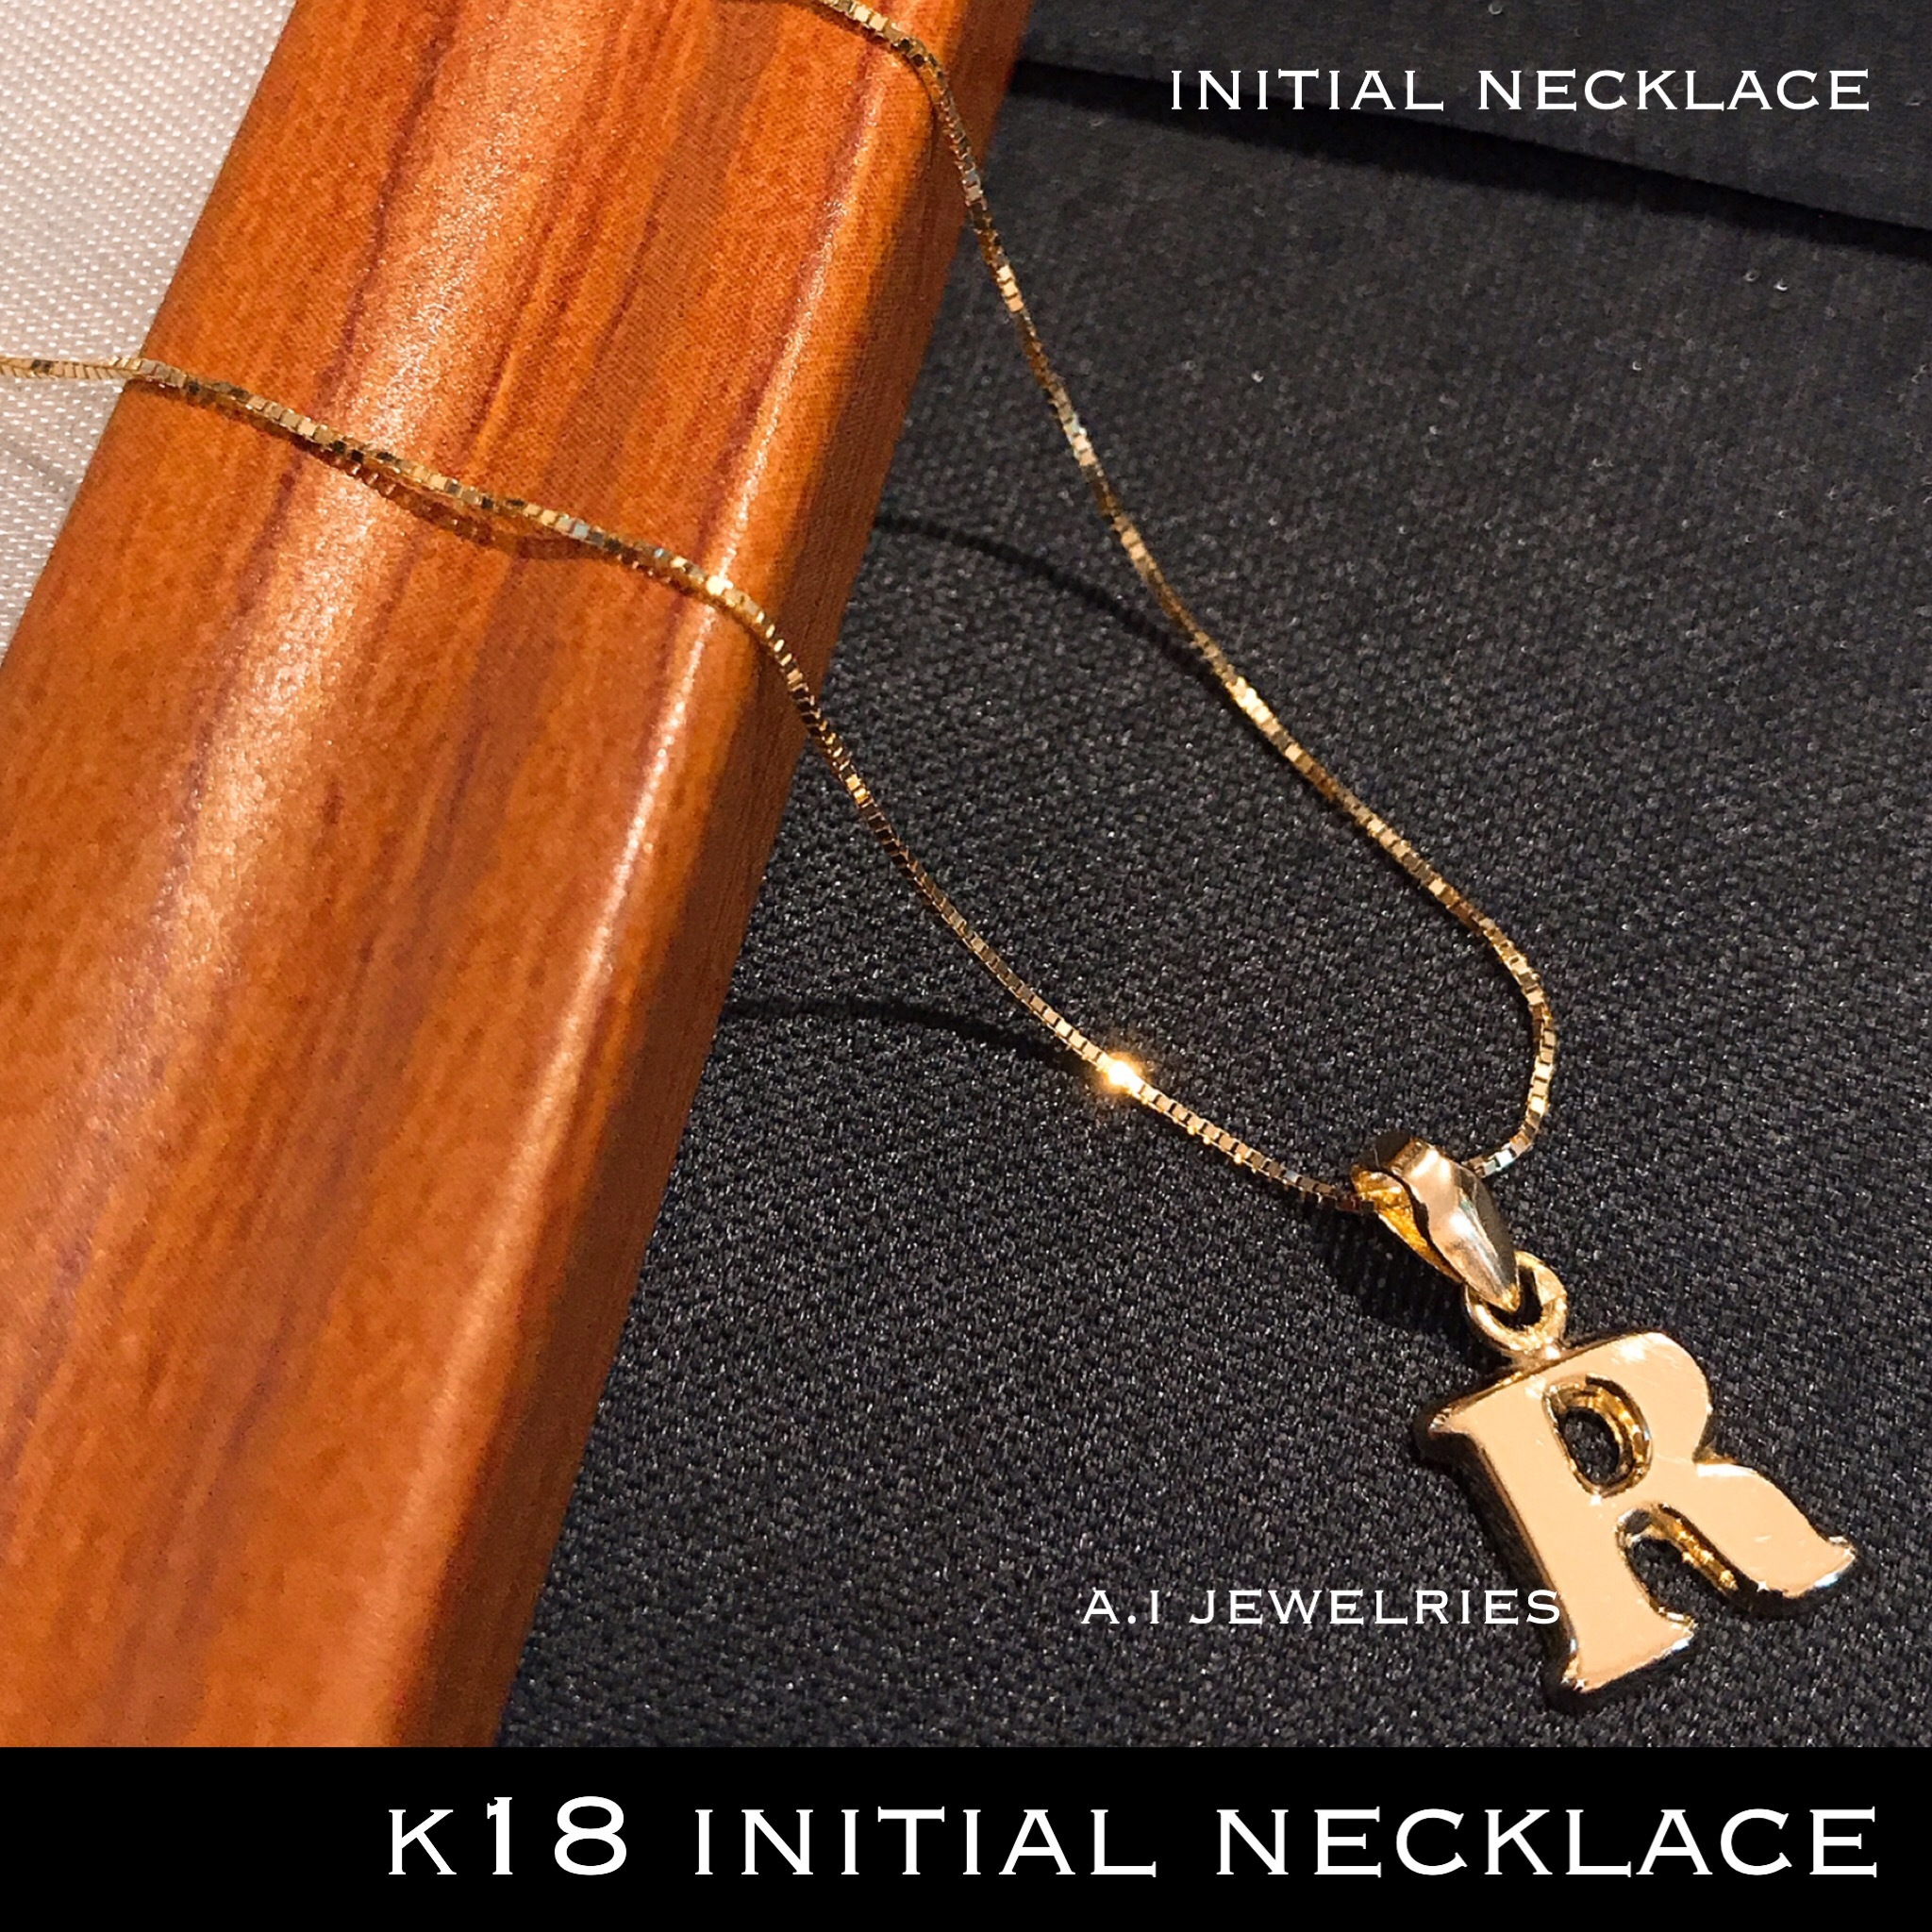 k18 18金 イニシャル ネックレス 40cm / k18 initial necklace 40cm | A.I JEWELRIES / エイアイジュエリーズ